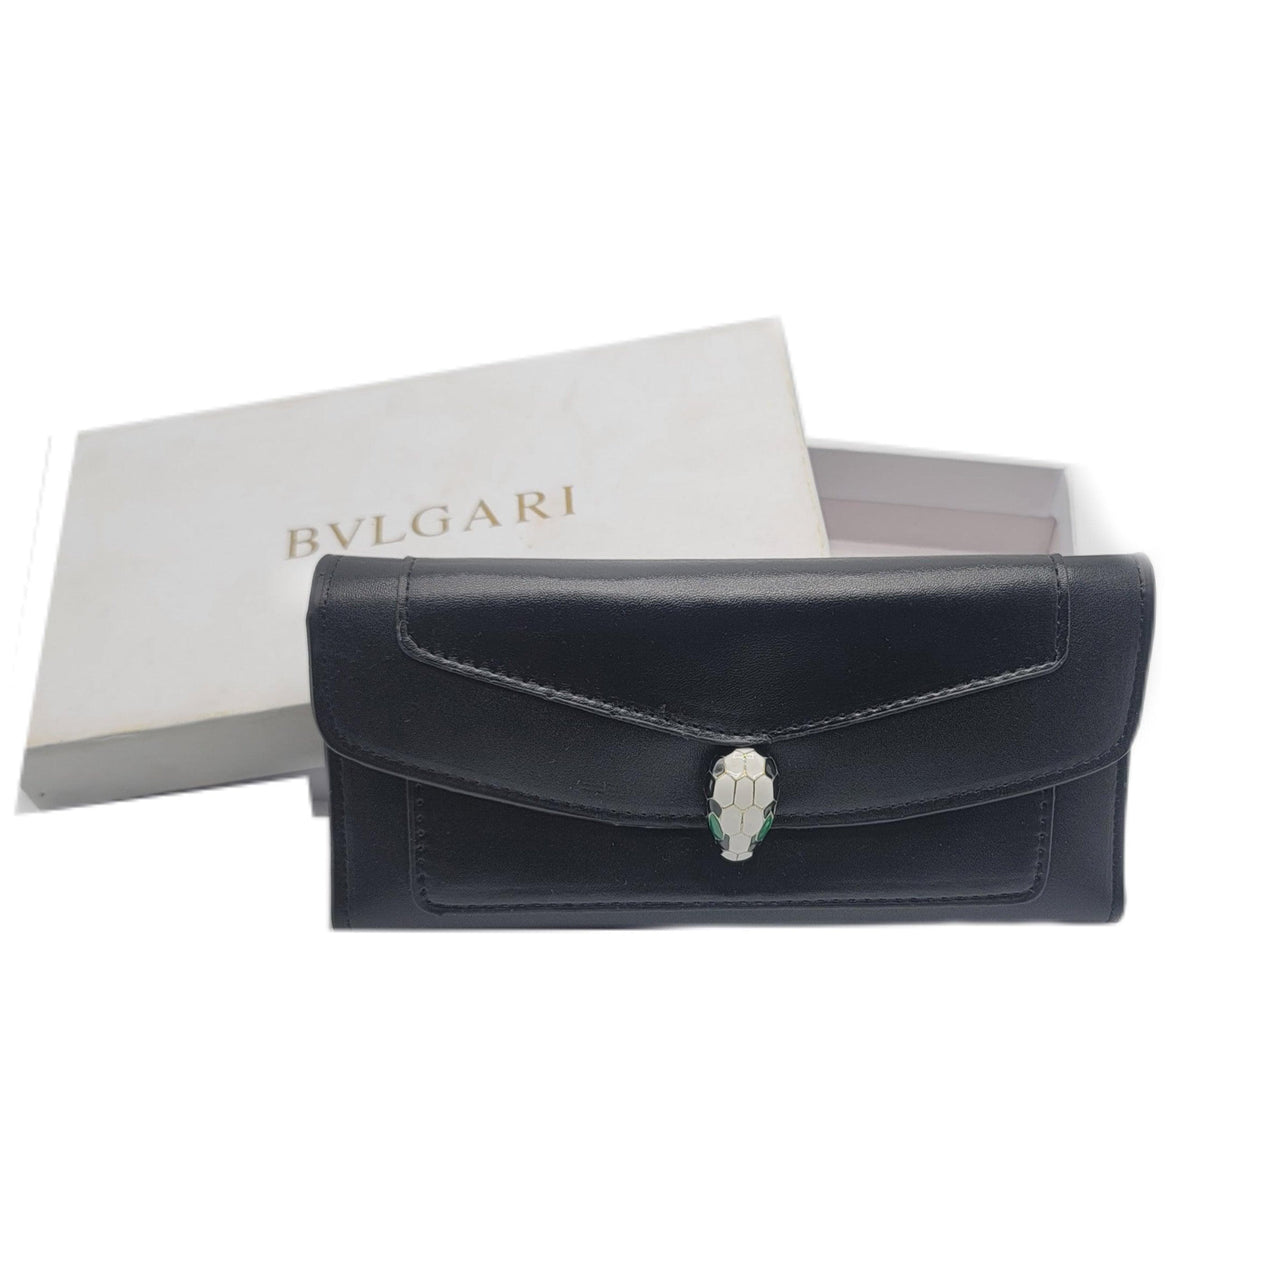 The Bag Couture Luggage & Bags BVLGARI 3 Fold Wallet Black